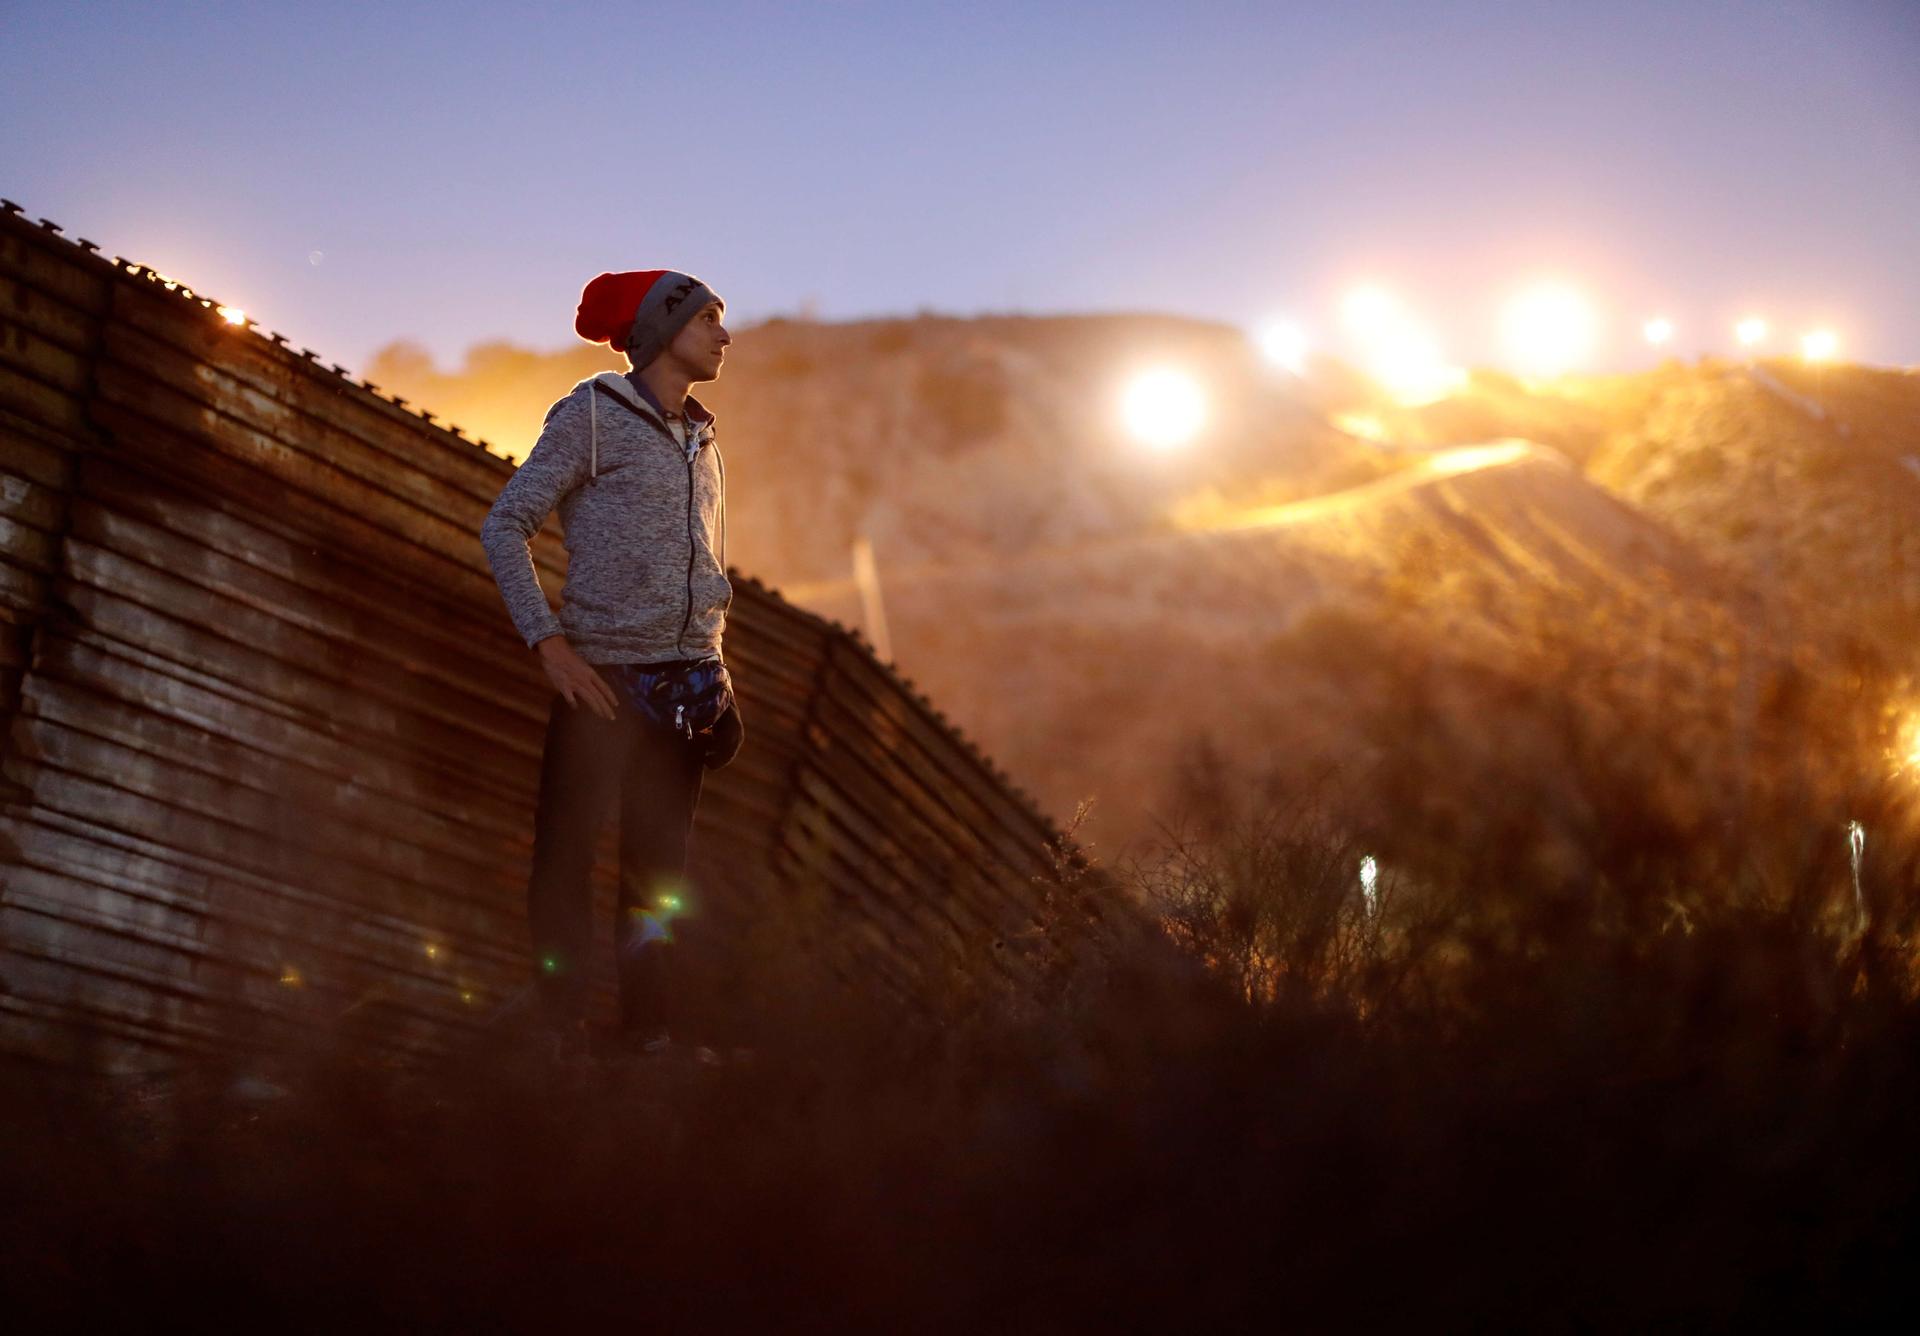 A migrant from Honduras stands in front of the border wall with the sun shining behind him 